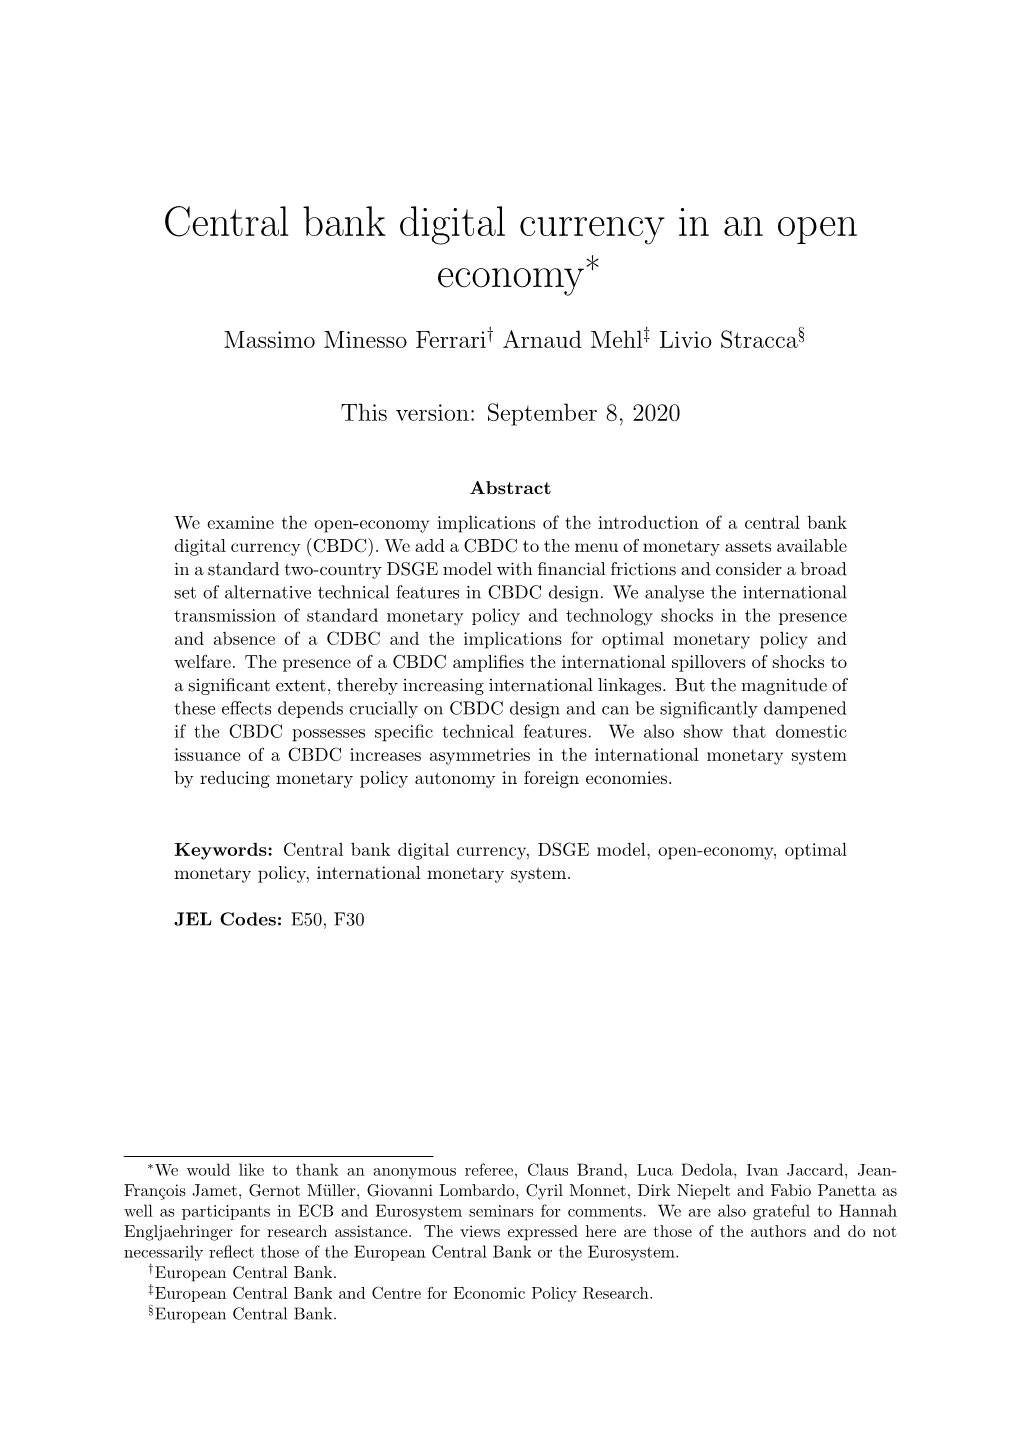 Central Bank Digital Currency in an Open Economy∗